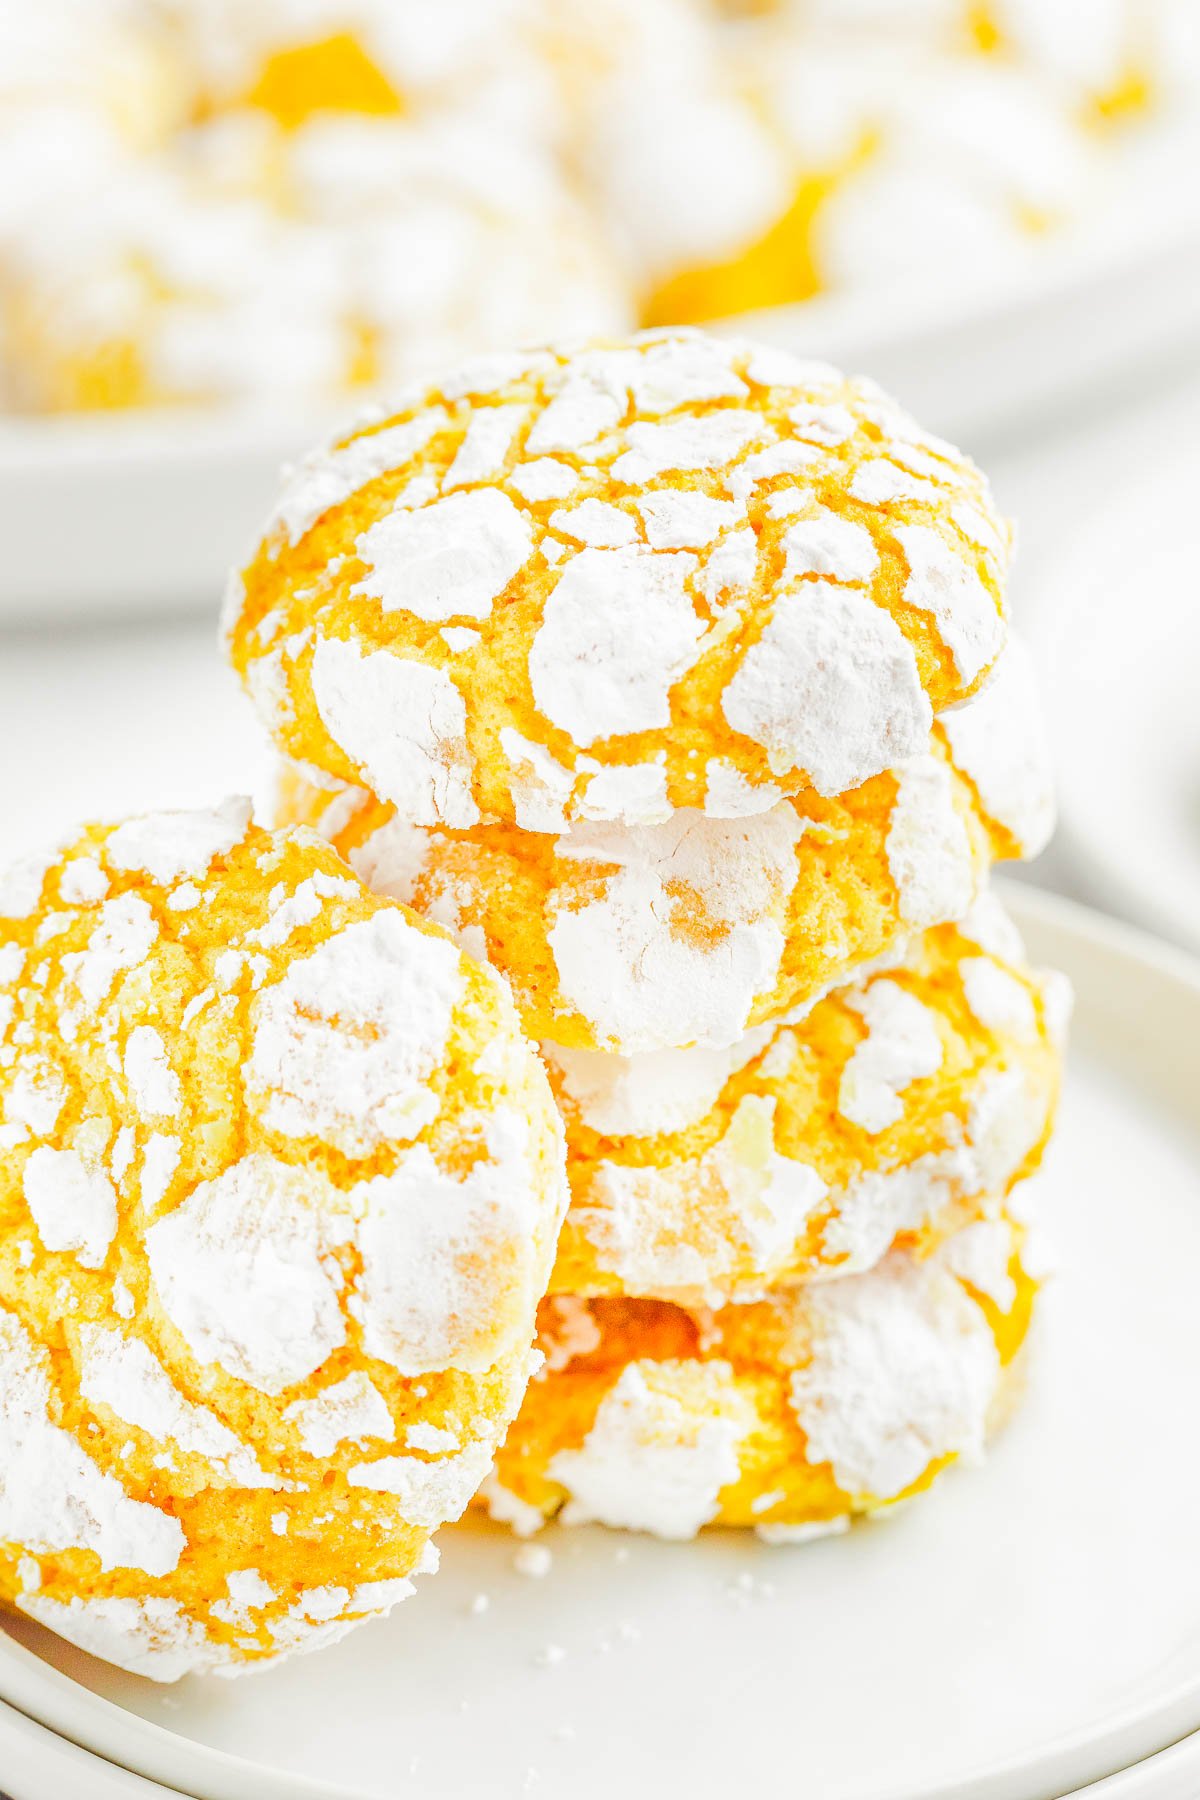 Lemon Crinkle Cookies — Lemon crinkles are pillowy soft on the inside and chewy on the outside, with slightly crispy edges from the powdered sugar coating! They taste like lemon bars, but in cookie form! The dough is flavored with lemon three ways and is perfect for holiday gatherings, Easter, Mother’s day, or whenever you’re craving an EASY lemon dessert 🍋!Lemon Crinkle Cookies — Lemon crinkles are pillowy soft on the inside and chewy on the outside, with slightly crispy edges from the powdered sugar coating! They taste like lemon bars, but in cookie form! The dough is flavored with lemon three ways and is perfect for holiday gatherings, Easter, Mother’s day, or whenever you’re craving an EASY lemon dessert 🍋!